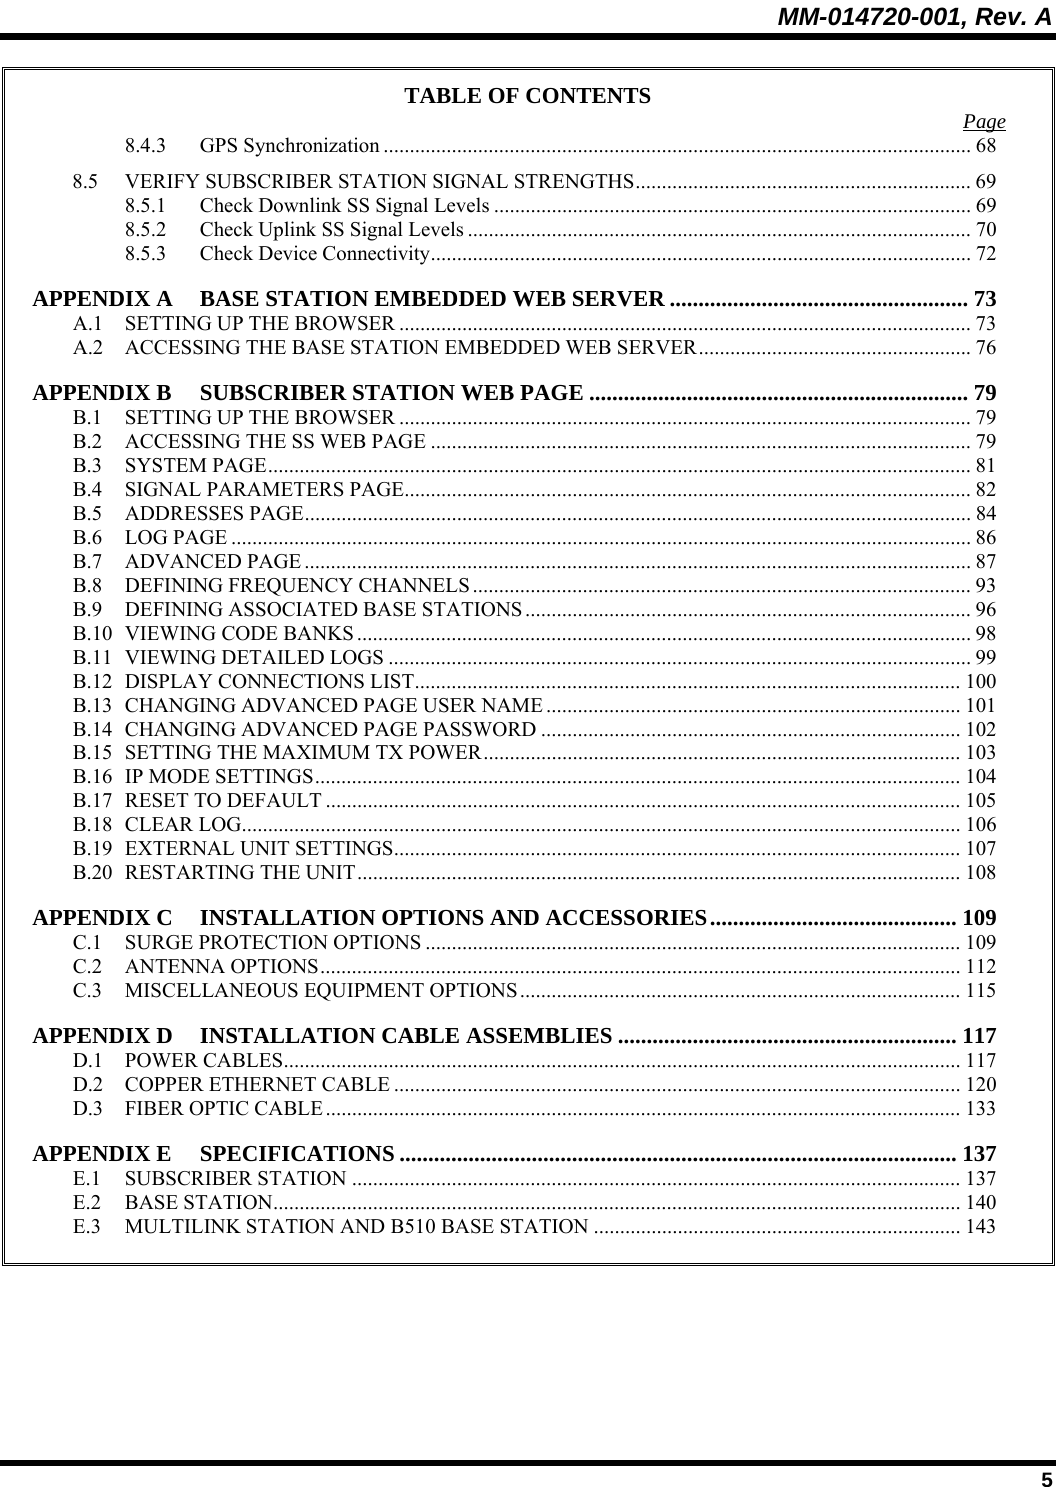 MM-014720-001, Rev. A  5 TABLE OF CONTENTS  Page 8.4.3 GPS Synchronization ................................................................................................................ 68 8.5 VERIFY SUBSCRIBER STATION SIGNAL STRENGTHS................................................................ 69 8.5.1 Check Downlink SS Signal Levels ........................................................................................... 69 8.5.2 Check Uplink SS Signal Levels ................................................................................................ 70 8.5.3 Check Device Connectivity.......................................................................................................72 APPENDIX A BASE STATION EMBEDDED WEB SERVER .................................................... 73 A.1 SETTING UP THE BROWSER ............................................................................................................. 73 A.2 ACCESSING THE BASE STATION EMBEDDED WEB SERVER.................................................... 76 APPENDIX B SUBSCRIBER STATION WEB PAGE .................................................................. 79 B.1 SETTING UP THE BROWSER ............................................................................................................. 79 B.2 ACCESSING THE SS WEB PAGE .......................................................................................................79 B.3 SYSTEM PAGE...................................................................................................................................... 81 B.4 SIGNAL PARAMETERS PAGE............................................................................................................ 82 B.5 ADDRESSES PAGE............................................................................................................................... 84 B.6 LOG PAGE ............................................................................................................................................. 86 B.7 ADVANCED PAGE ............................................................................................................................... 87 B.8 DEFINING FREQUENCY CHANNELS ............................................................................................... 93 B.9 DEFINING ASSOCIATED BASE STATIONS..................................................................................... 96 B.10 VIEWING CODE BANKS ..................................................................................................................... 98 B.11 VIEWING DETAILED LOGS ............................................................................................................... 99 B.12 DISPLAY CONNECTIONS LIST........................................................................................................100 B.13 CHANGING ADVANCED PAGE USER NAME ............................................................................... 101 B.14 CHANGING ADVANCED PAGE PASSWORD ................................................................................ 102 B.15 SETTING THE MAXIMUM TX POWER........................................................................................... 103 B.16 IP MODE SETTINGS........................................................................................................................... 104 B.17 RESET TO DEFAULT ......................................................................................................................... 105 B.18 CLEAR LOG......................................................................................................................................... 106 B.19 EXTERNAL UNIT SETTINGS............................................................................................................ 107 B.20 RESTARTING THE UNIT................................................................................................................... 108 APPENDIX C INSTALLATION OPTIONS AND ACCESSORIES........................................... 109 C.1 SURGE PROTECTION OPTIONS ...................................................................................................... 109 C.2 ANTENNA OPTIONS.......................................................................................................................... 112 C.3 MISCELLANEOUS EQUIPMENT OPTIONS.................................................................................... 115 APPENDIX D INSTALLATION CABLE ASSEMBLIES ........................................................... 117 D.1 POWER CABLES................................................................................................................................. 117 D.2 COPPER ETHERNET CABLE ............................................................................................................ 120 D.3 FIBER OPTIC CABLE......................................................................................................................... 133 APPENDIX E SPECIFICATIONS ................................................................................................. 137 E.1 SUBSCRIBER STATION .................................................................................................................... 137 E.2 BASE STATION................................................................................................................................... 140 E.3 MULTILINK STATION AND B510 BASE STATION ...................................................................... 143  